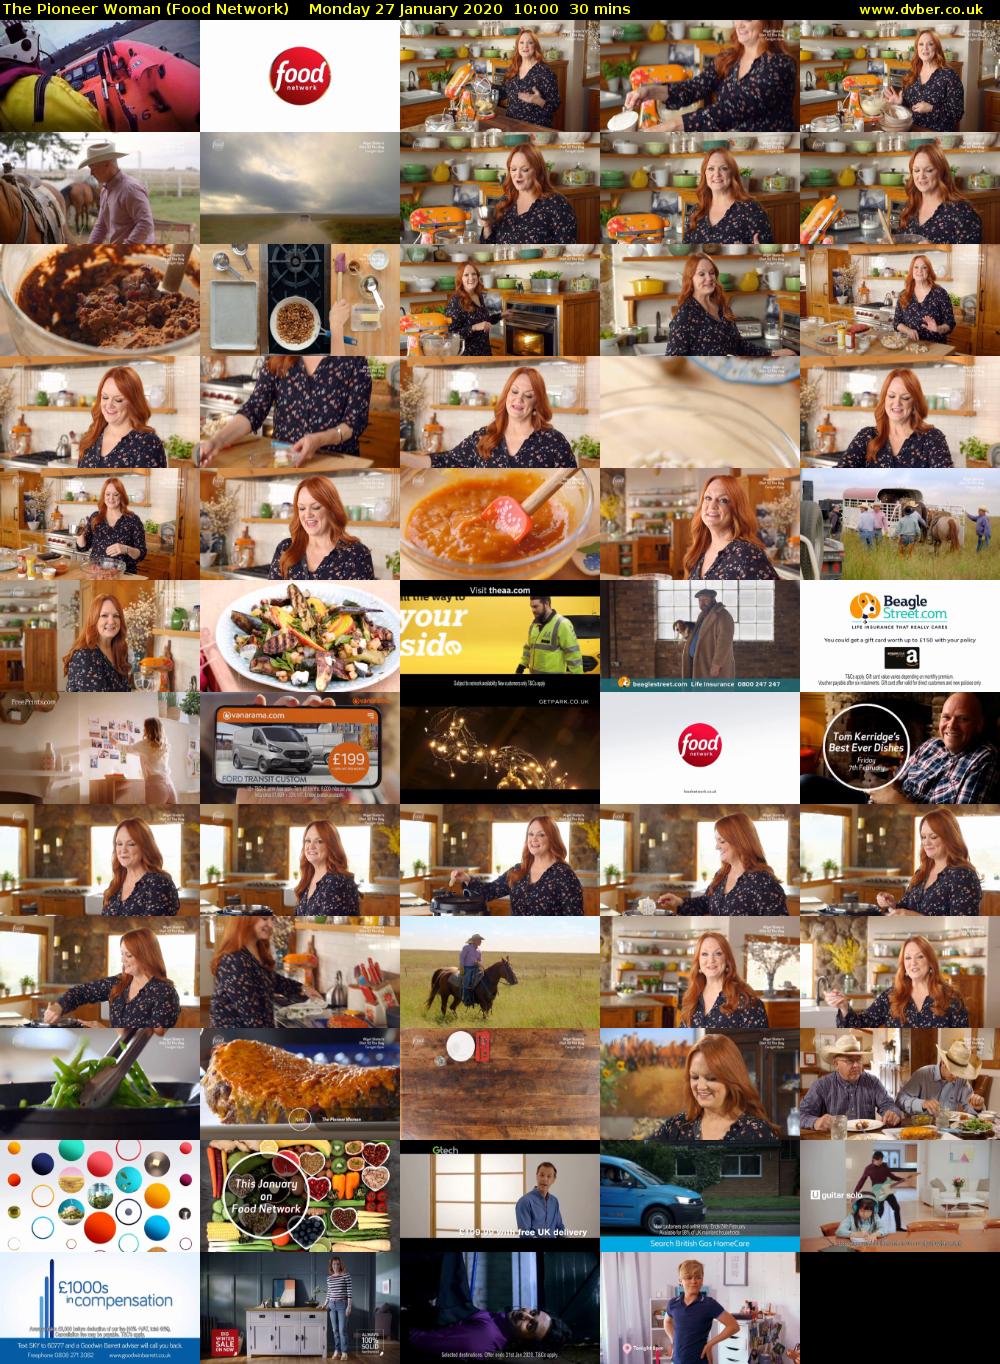 The Pioneer Woman (Food Network) Monday 27 January 2020 10:00 - 10:30